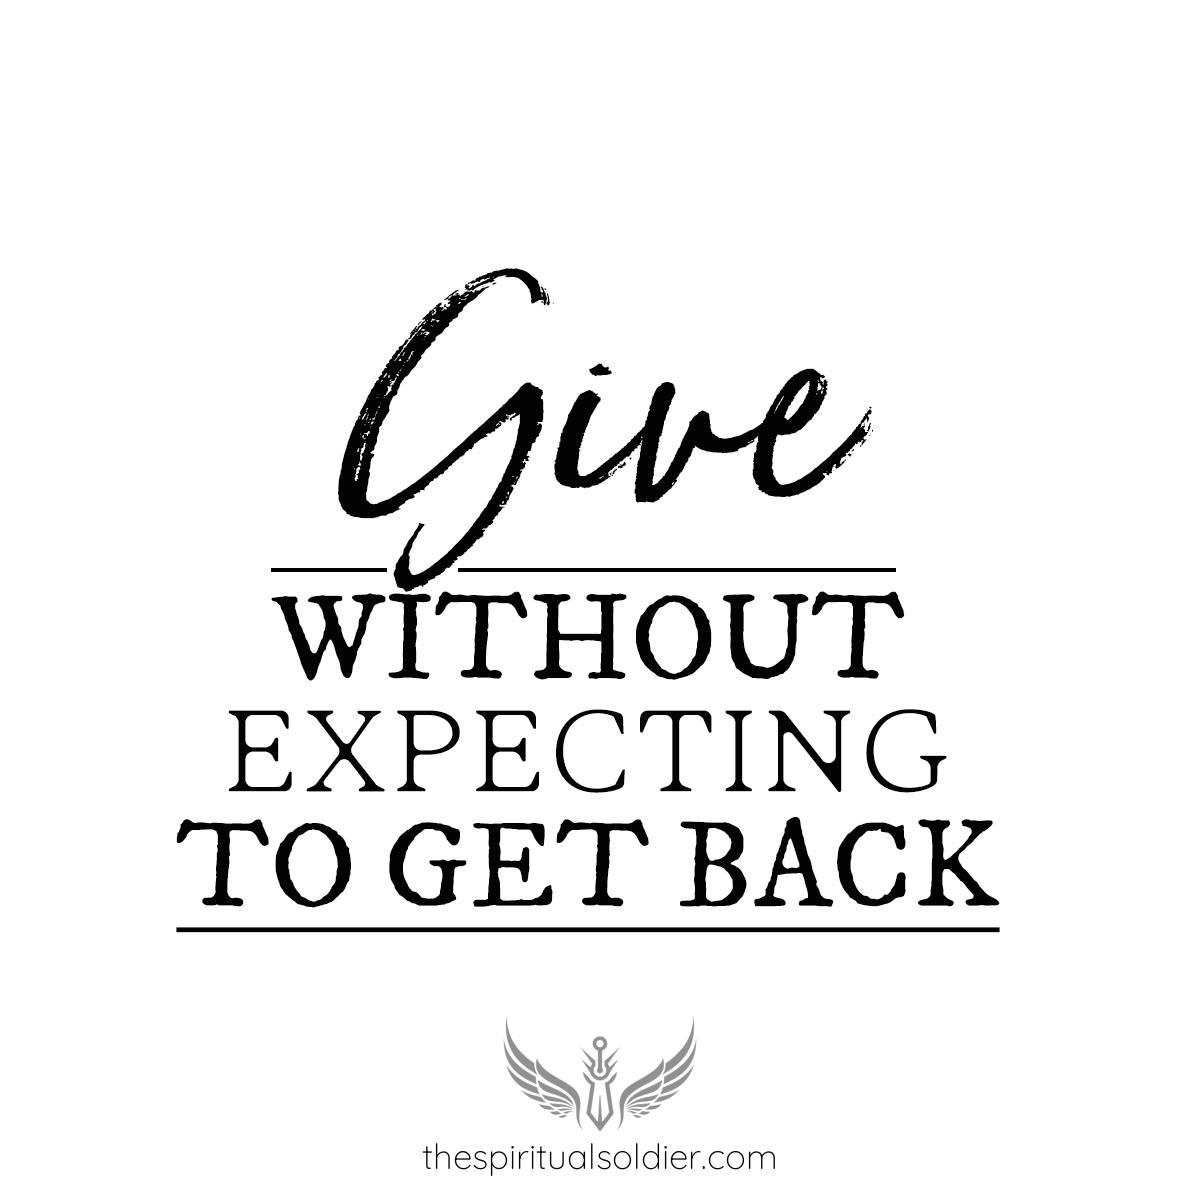 Give without expecting to get back.

 #drlepora #spiritualSoldier #Kindness #Generosity #SpreadLove #PayItForward #ActsOfKindness #GiveBack #BeTheChange #LoveWins #MakeADifference #RandomActsOfKindness #Community #Compassion #Empathy #Support